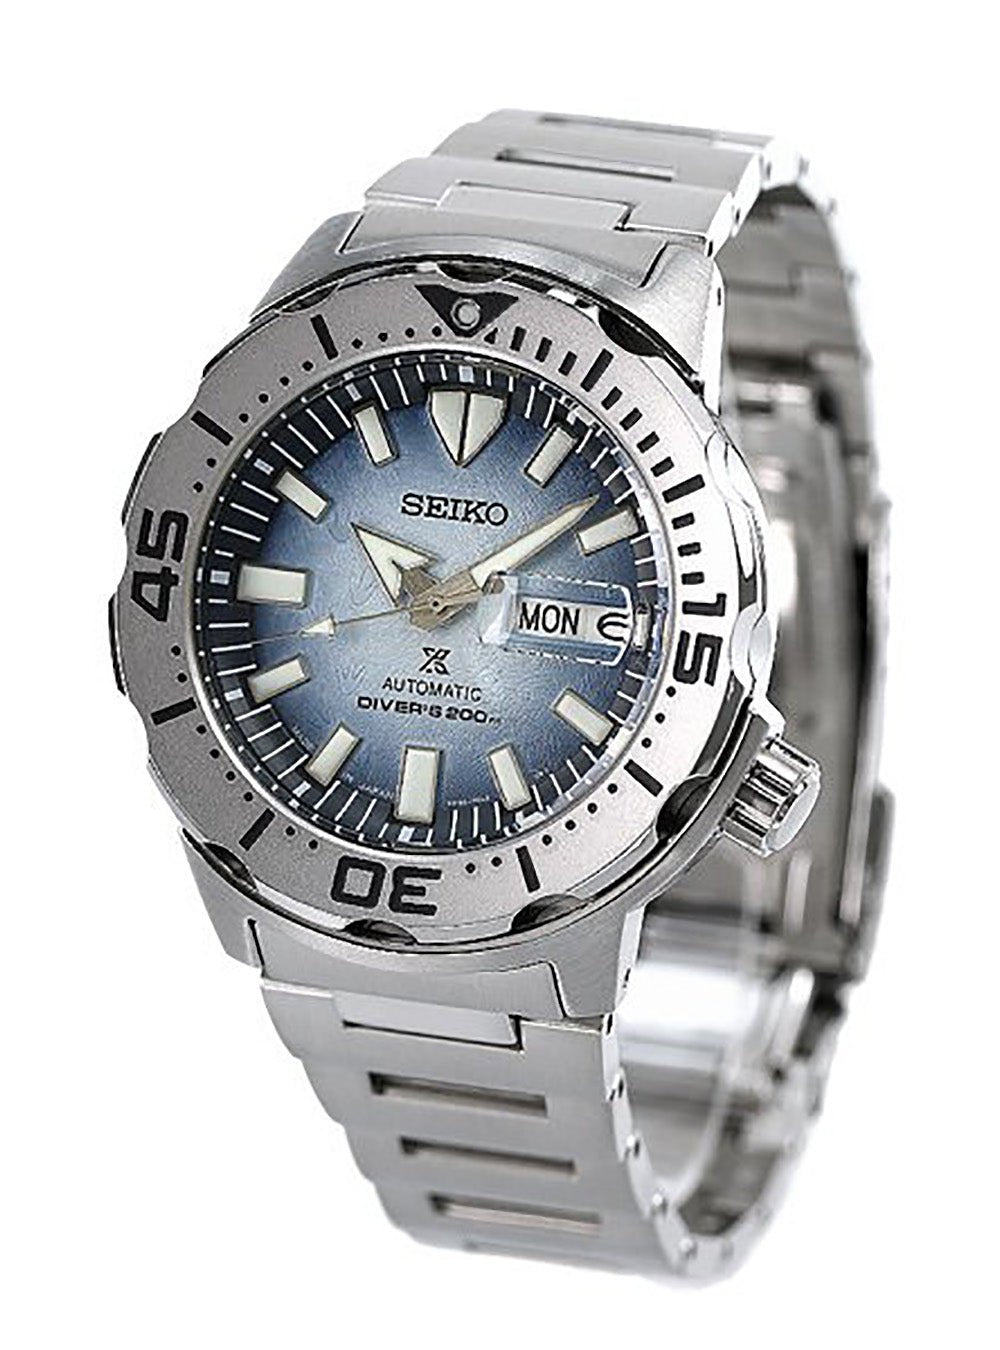 SEIKO PROSPEX DIVER SCUBA SAVE THE OCEAN SPECIAL EDITION MONSTER SBDY105 MADE IN JAPAN JDMjapan-select4954628459855WRISTWATCHSEIKO